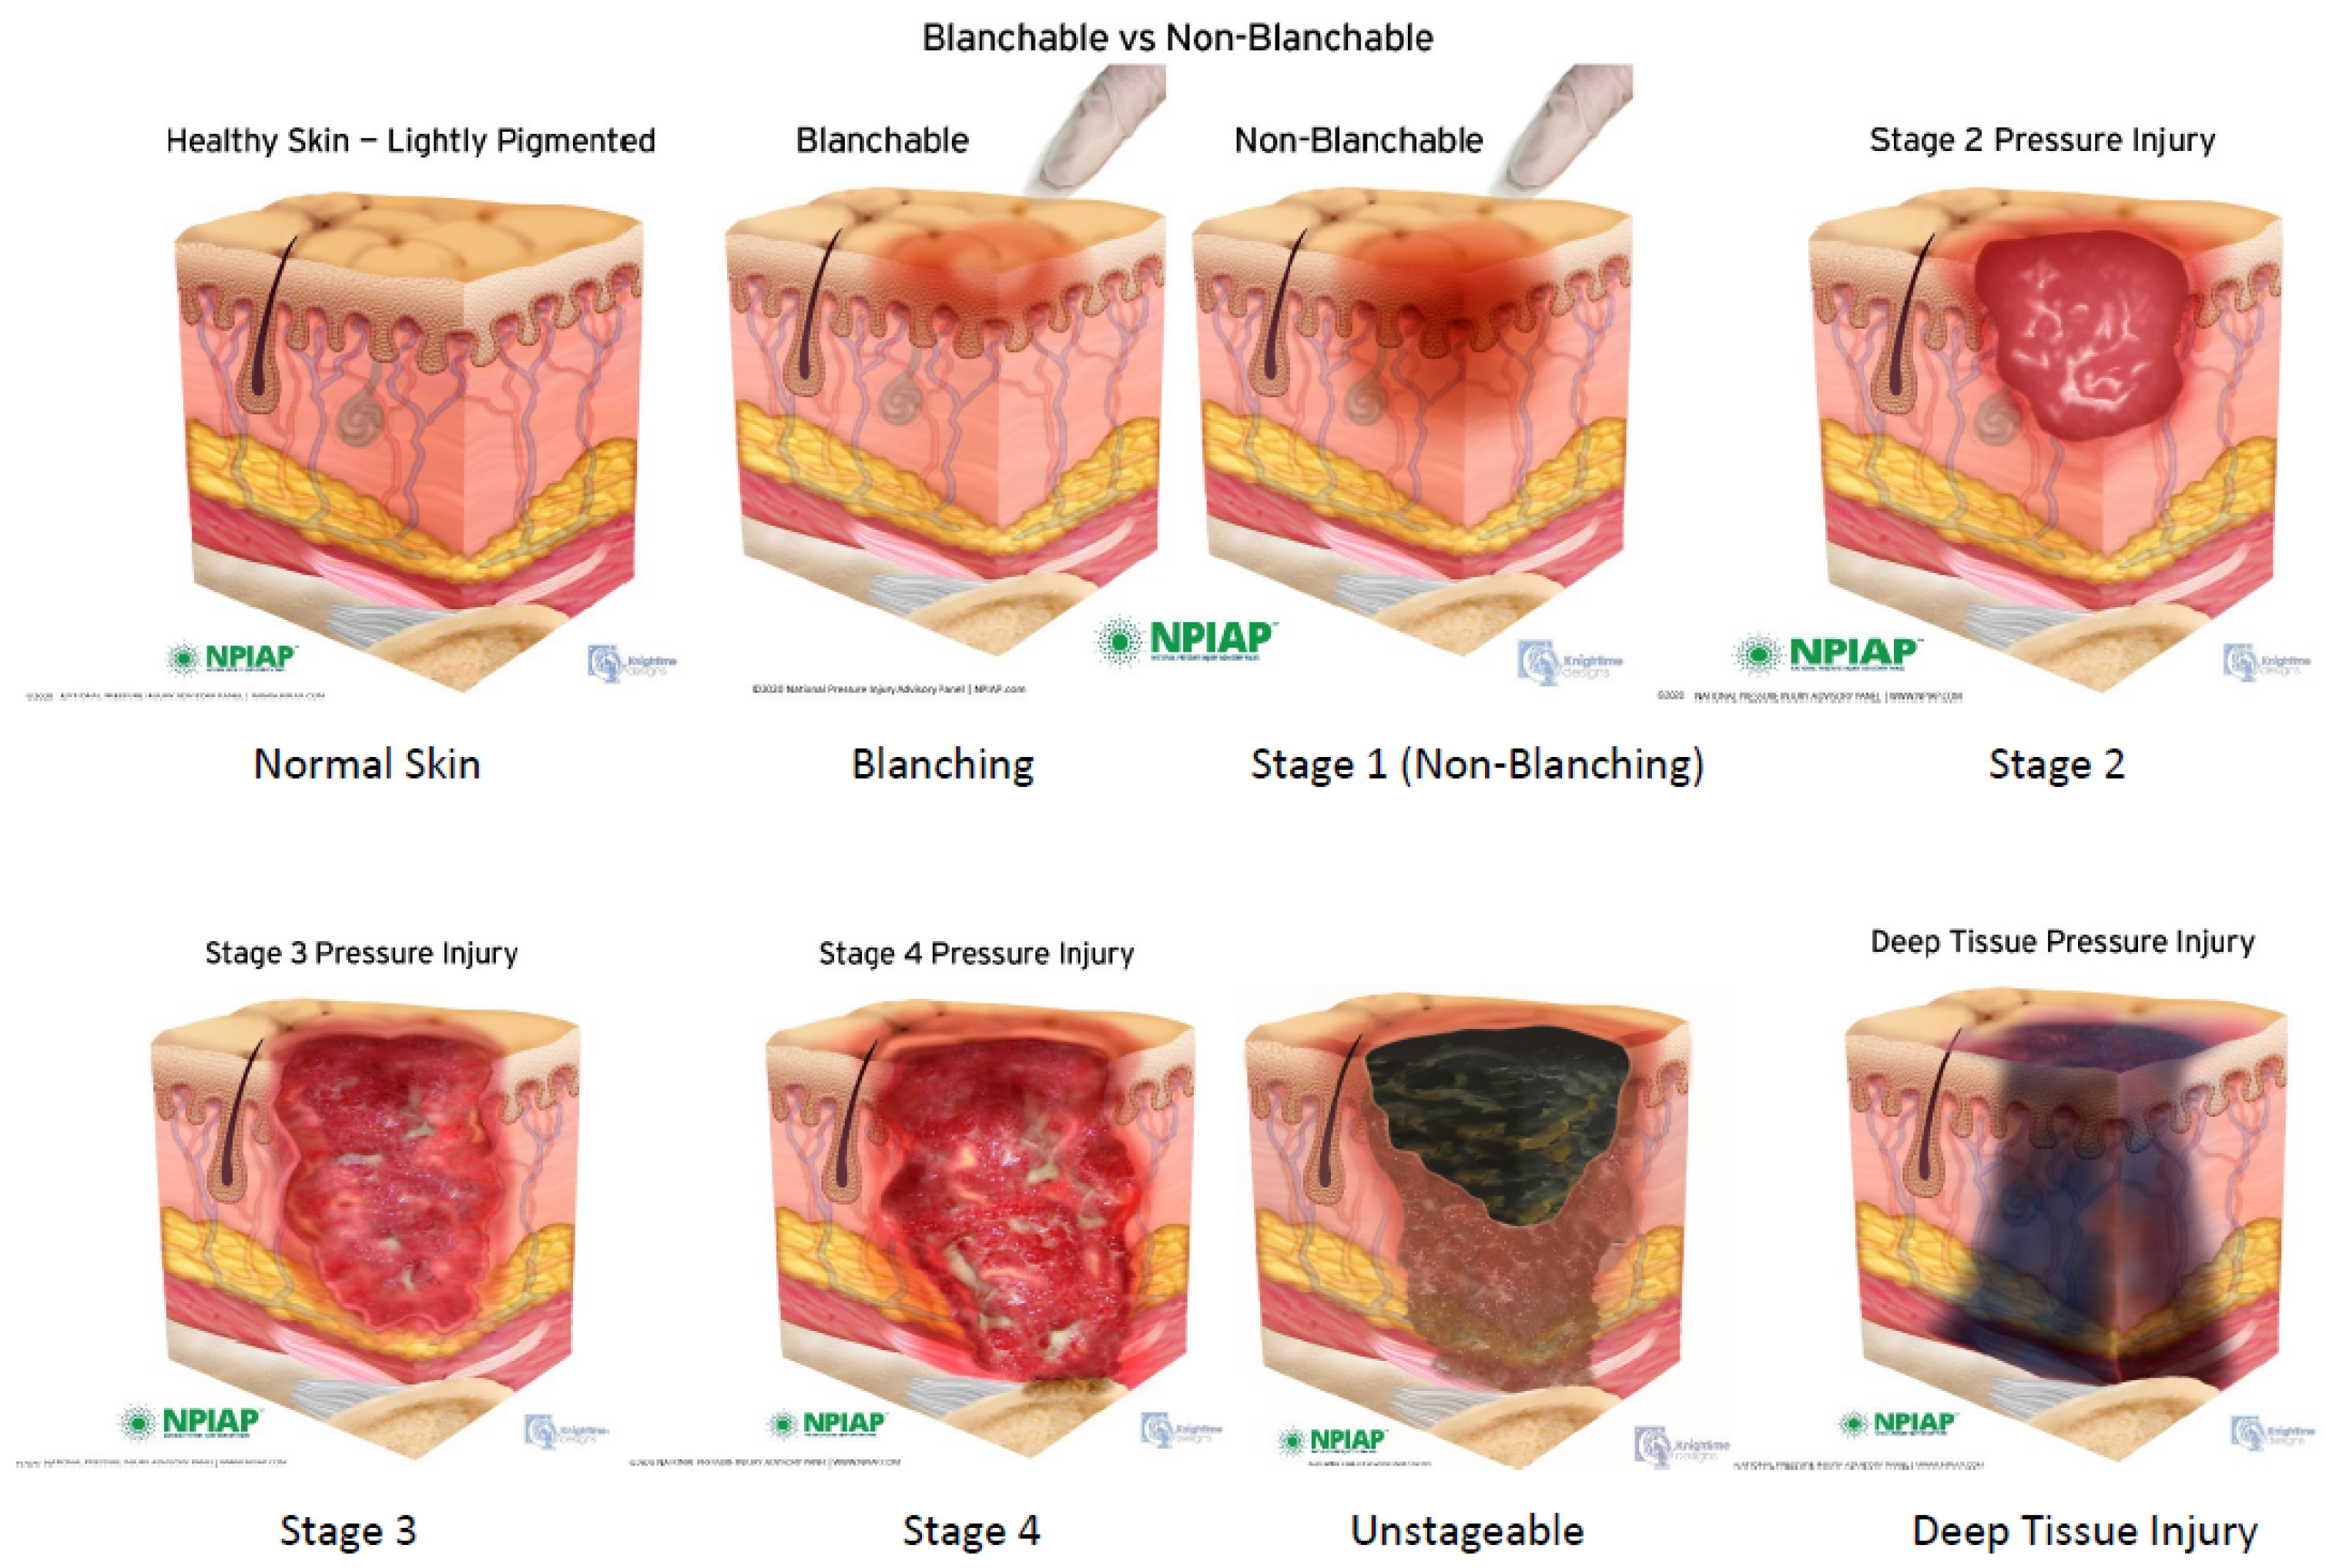 A Review of Deep Tissue Injury Development, Detection, and Prevention:  Shear Savvy